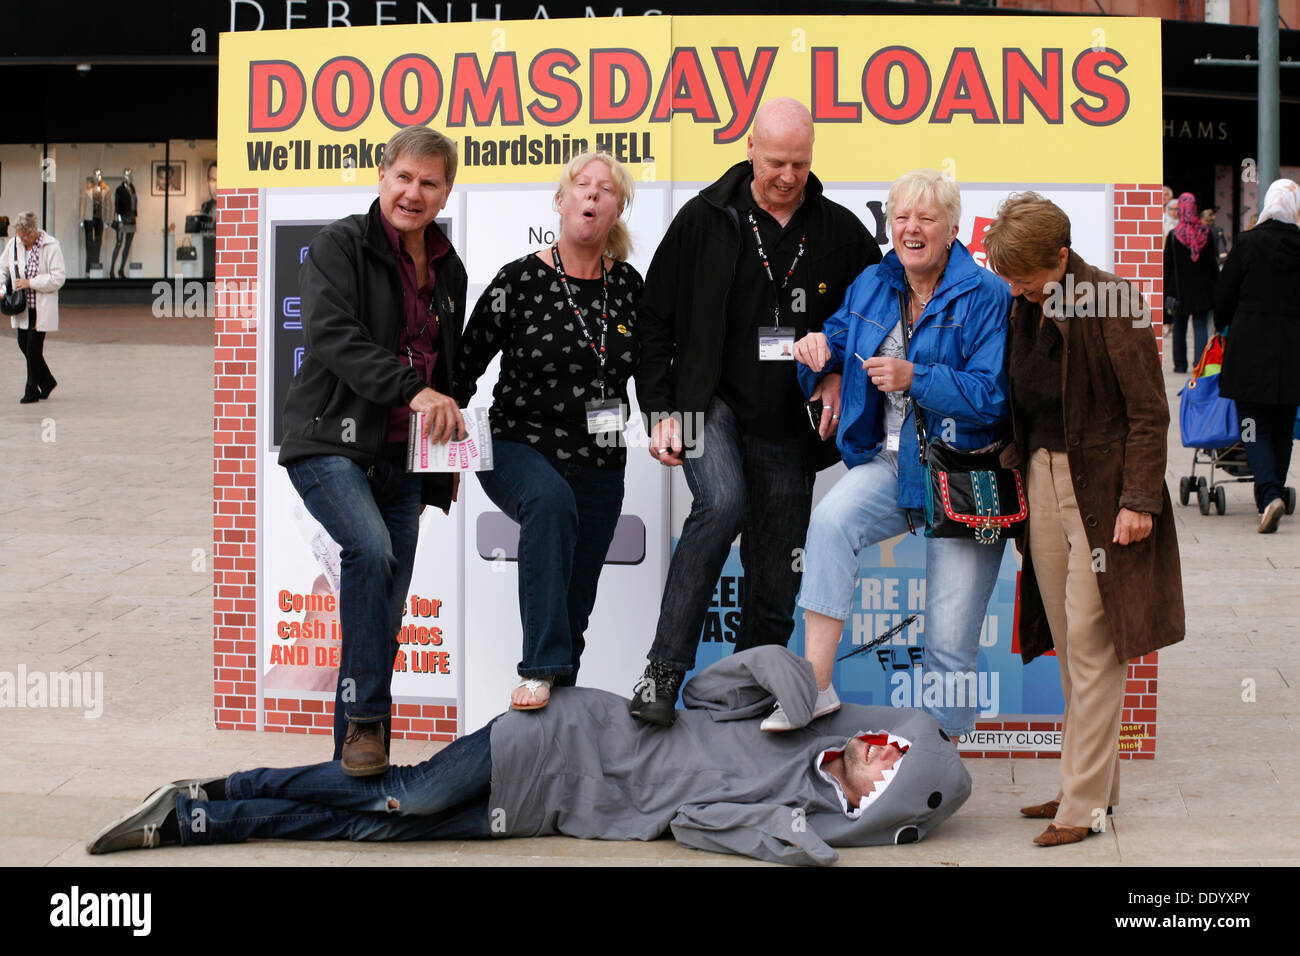 Bournemouth, UK 9 September 2013. A 'pop up doomsday payday loan shop' is set up in Bournemouth Square to coincide with latest Unite figures on the amount people are borrowing to get through the month; reportedly a new survey reveals the amount of money that hard pressed Unite members have to borrow each month to make ends meet has tripled since 2012 to £660. Stock Photo